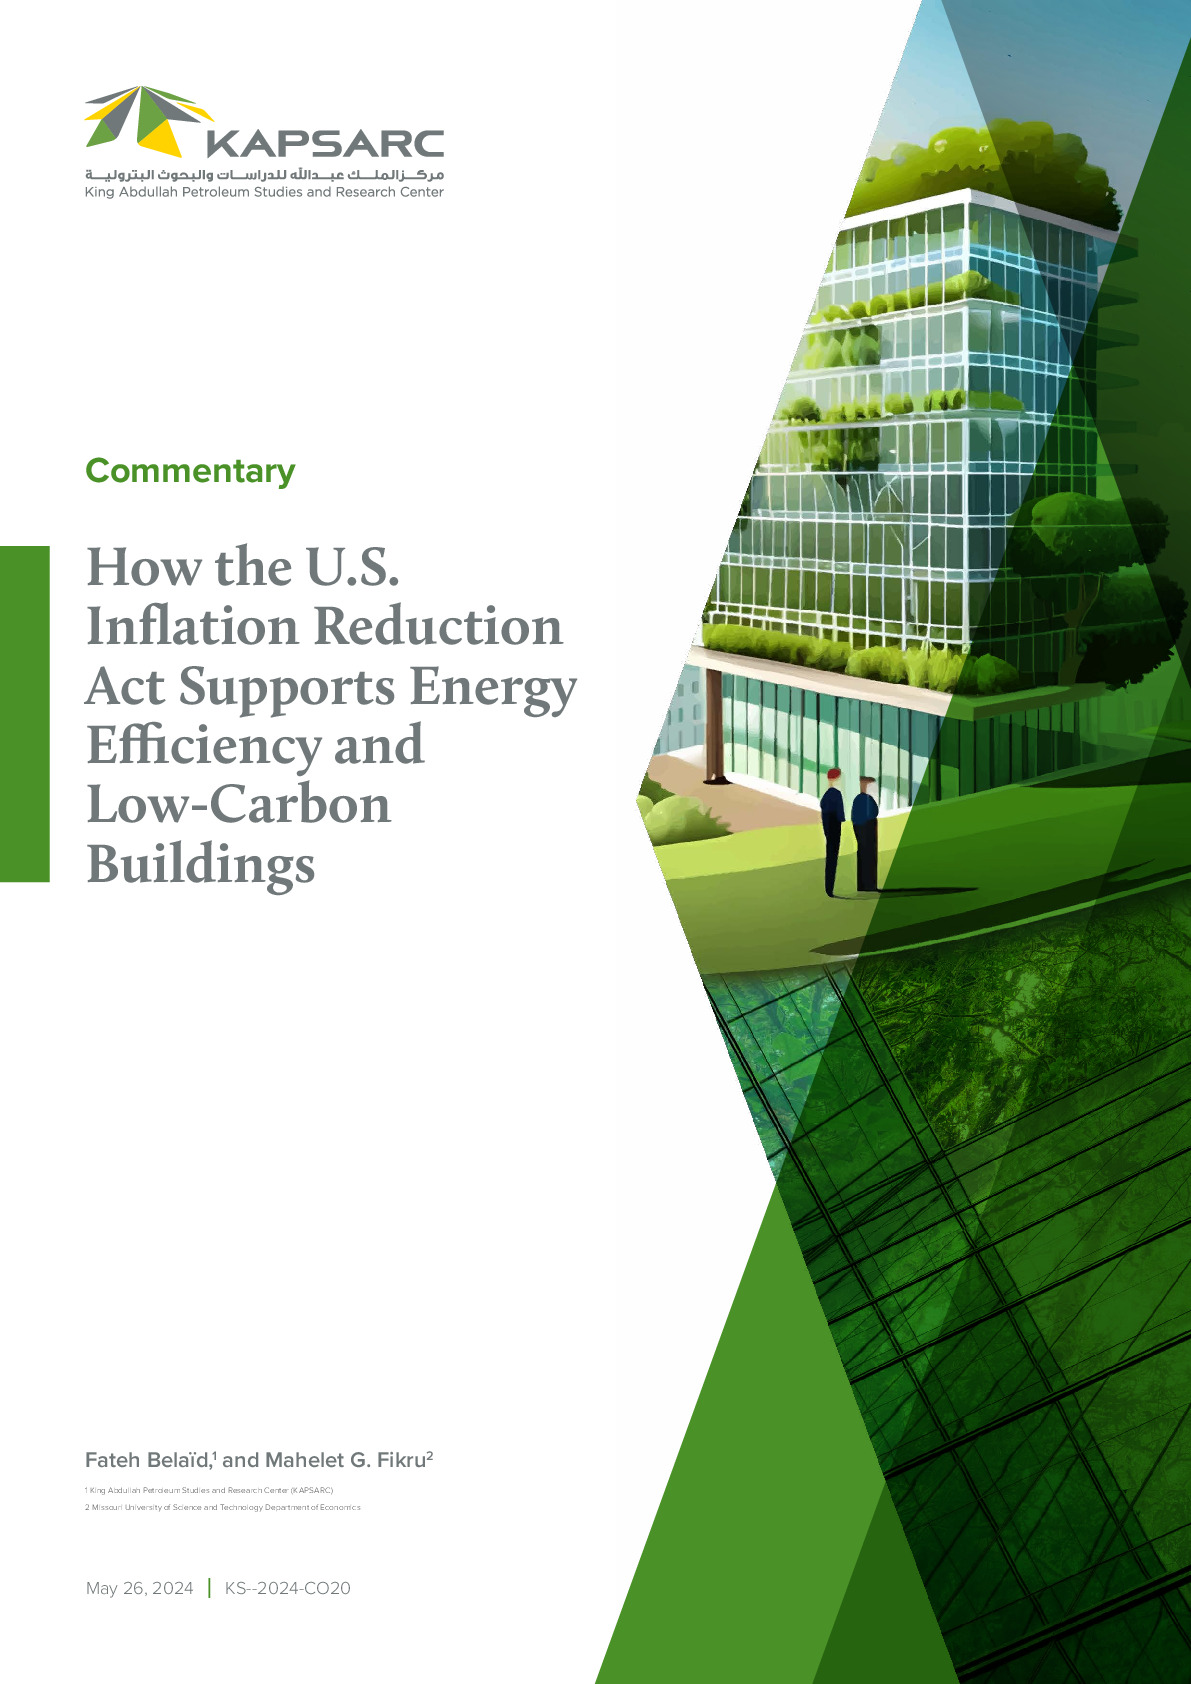 How the U.S. Inflation Reduction Act Supports Energy Efficiency and Low-Carbon Buildings